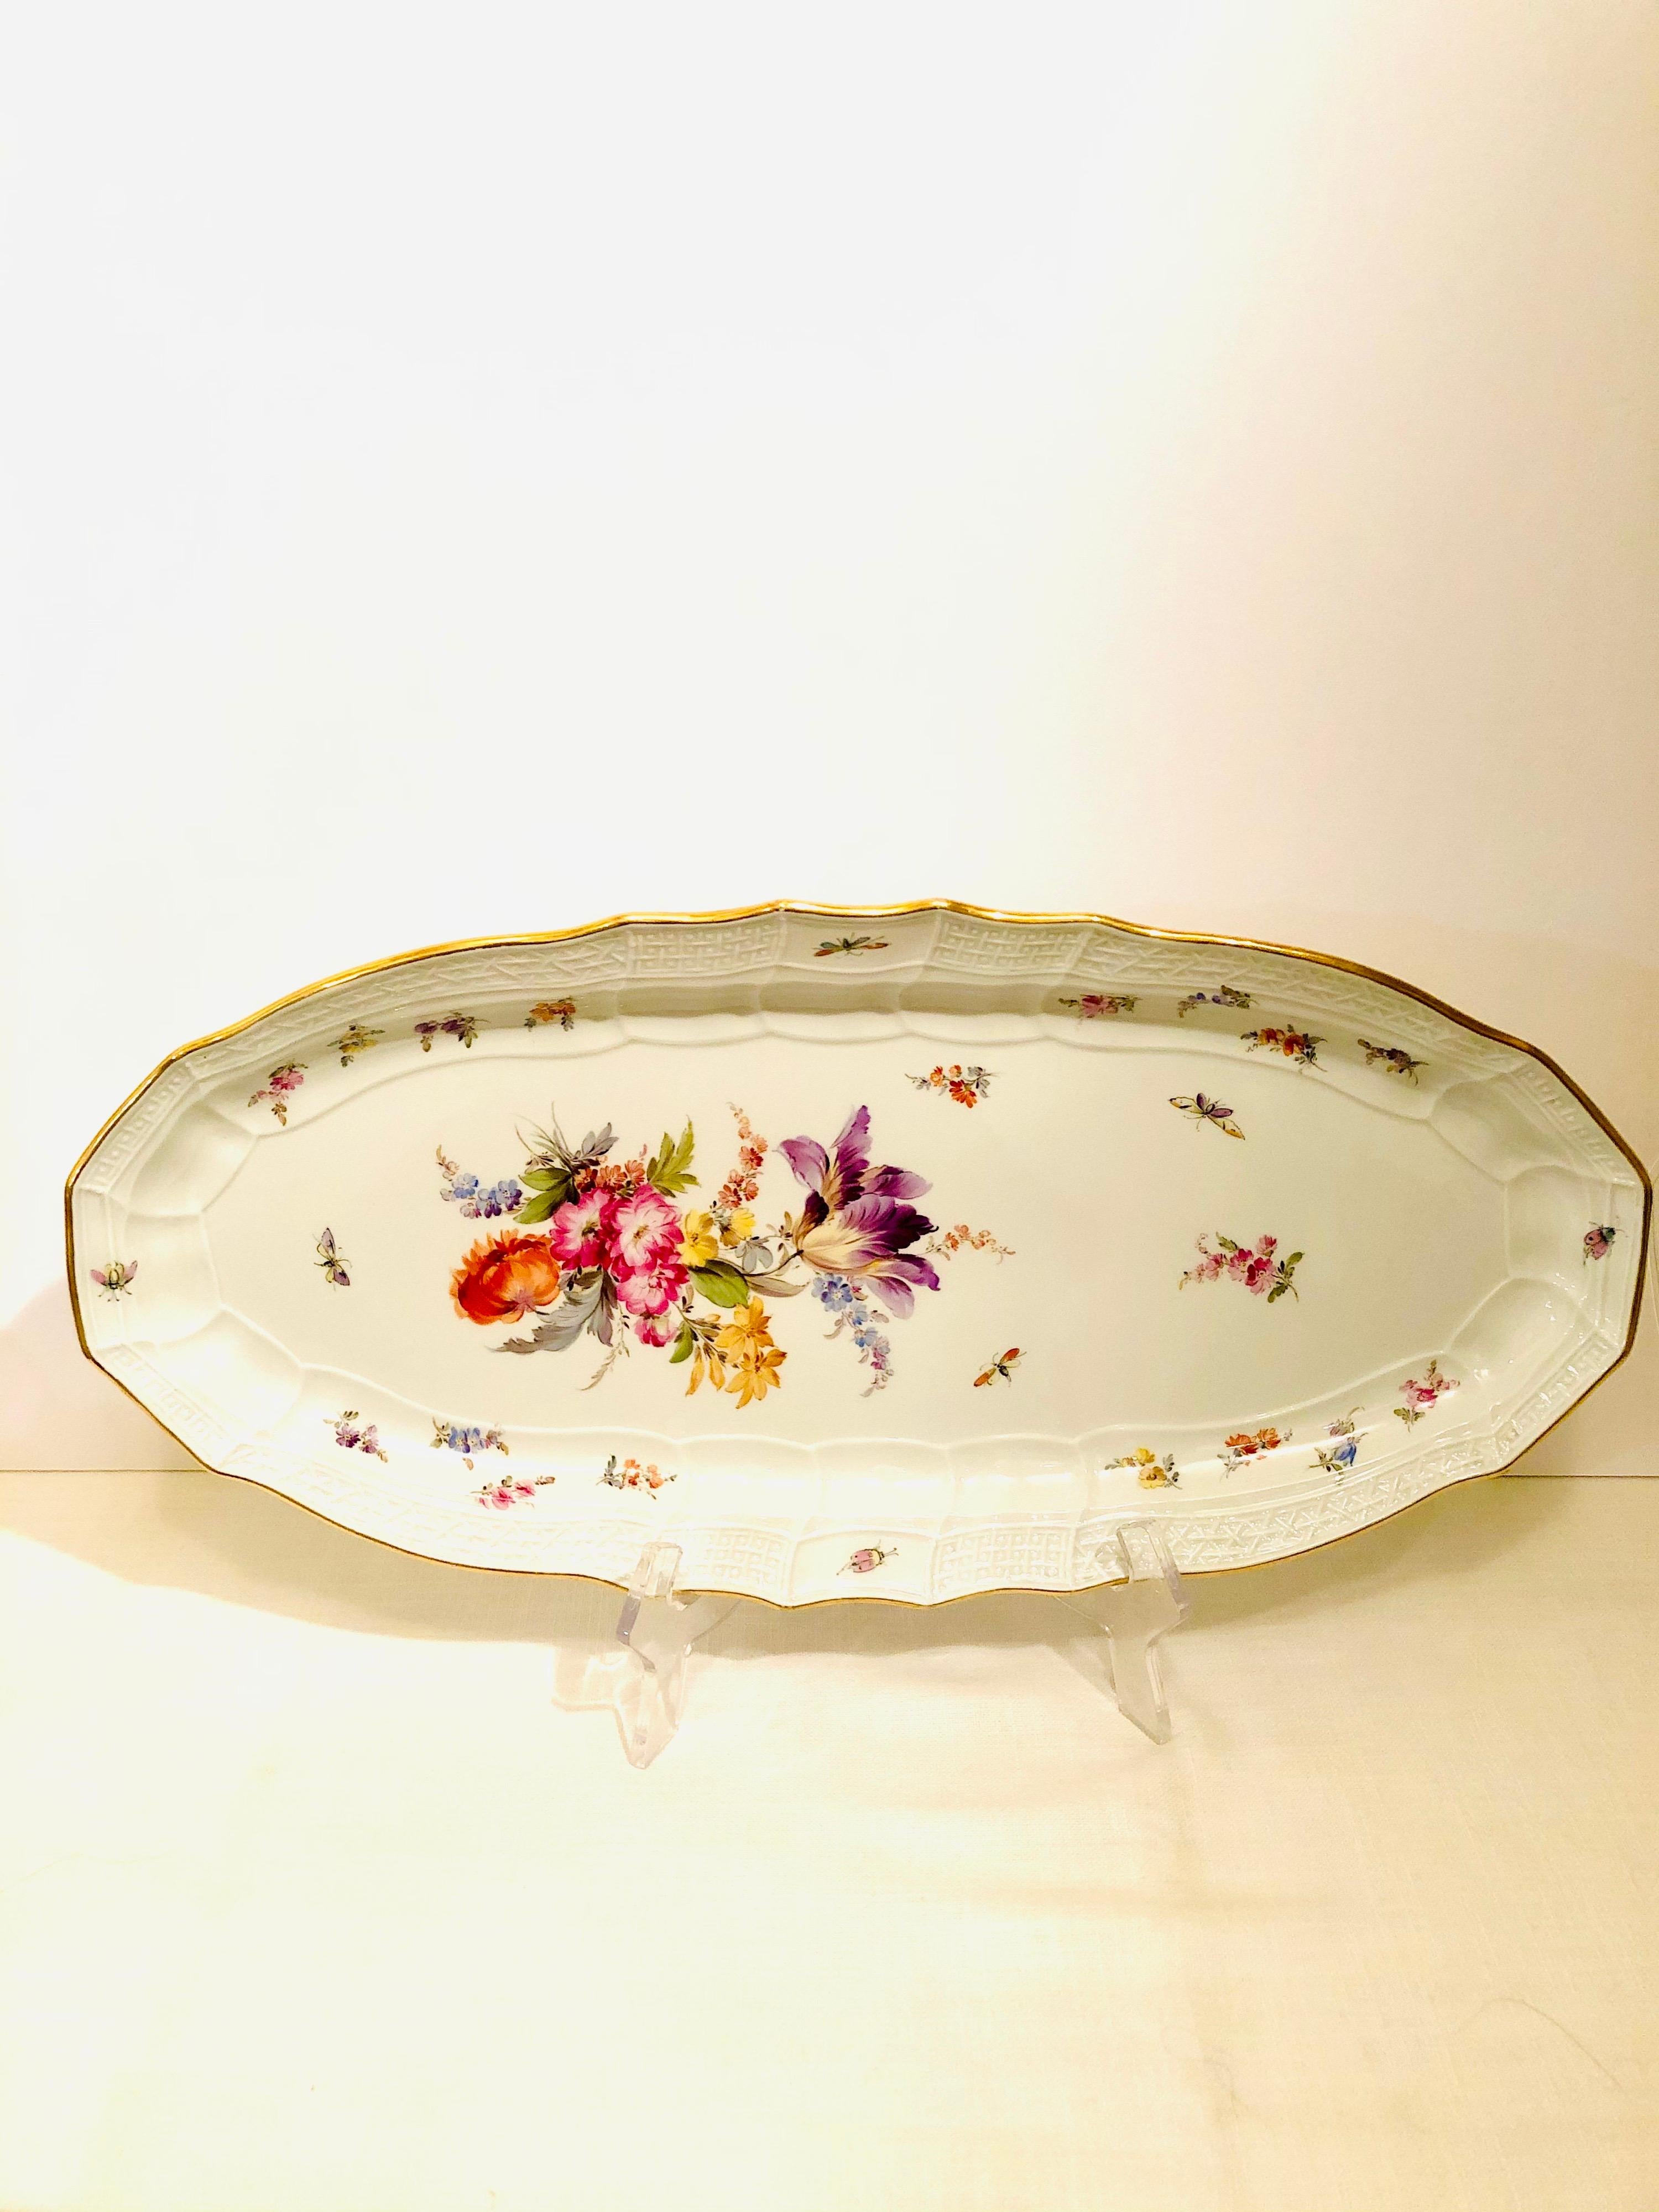 Hand-Painted Antique Meissen Fish Platter with a Bouquet of Flowers Including a Purple Tulip